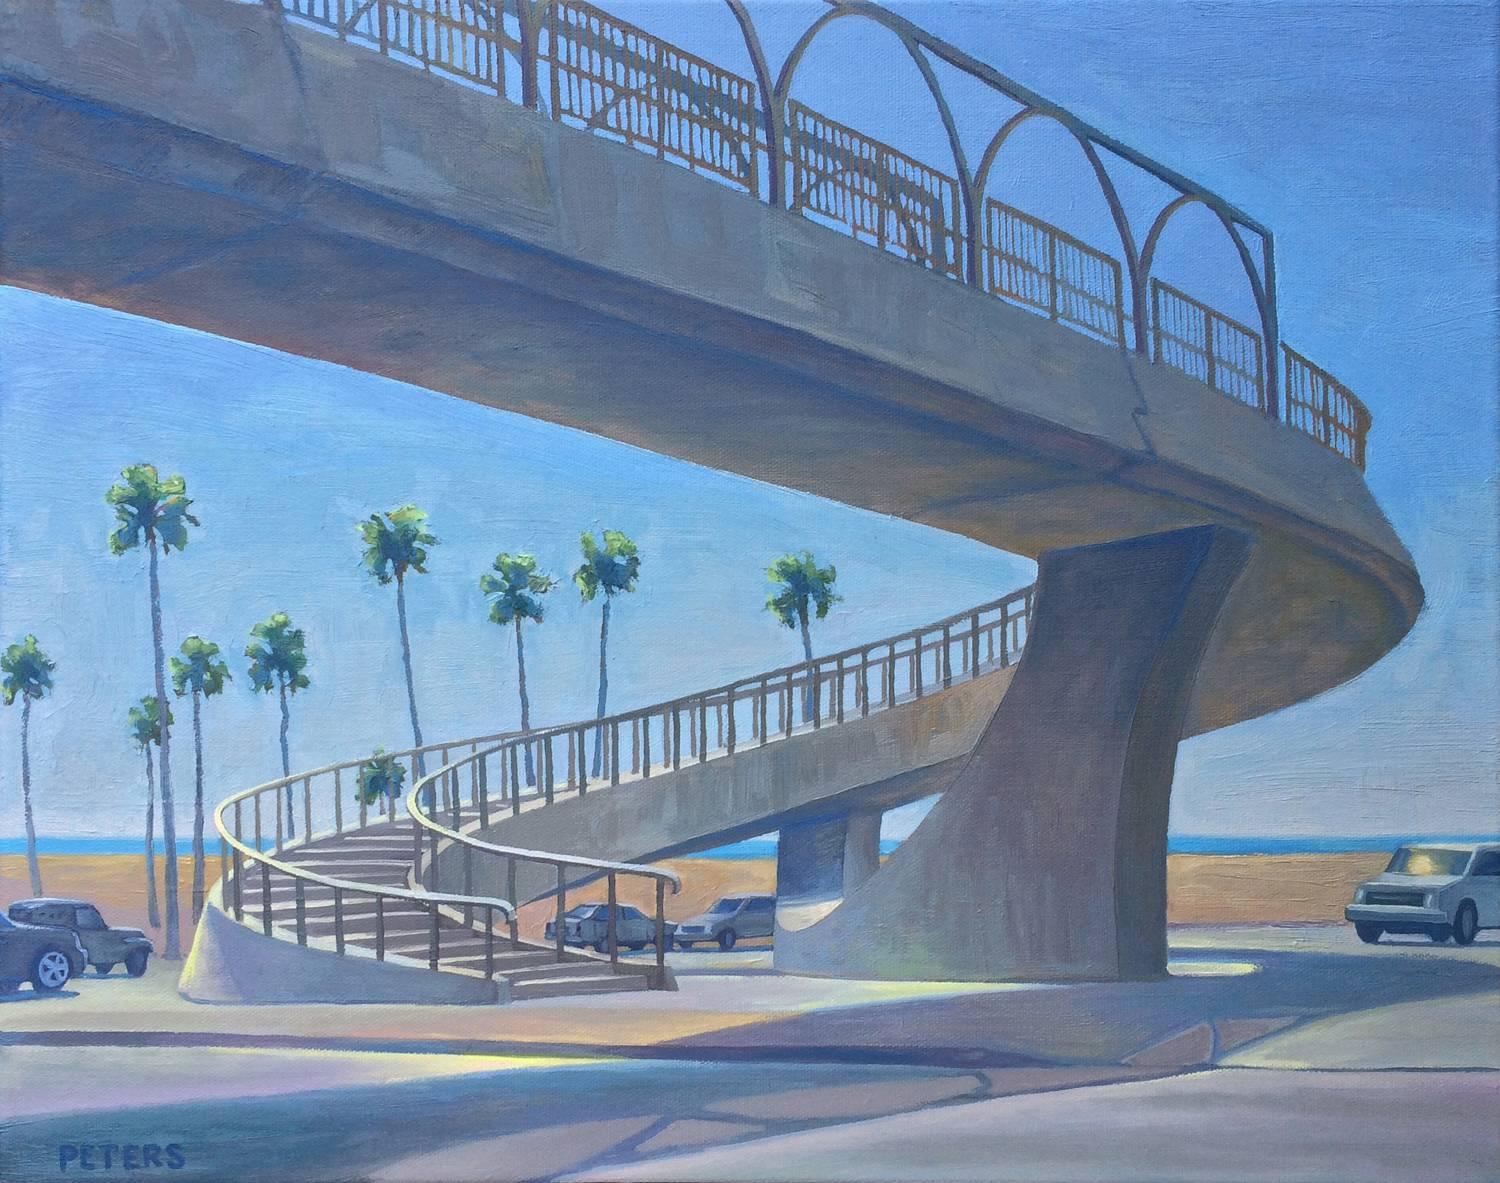 Pedestrian Walkway, PCH - Painting by Tony Peters